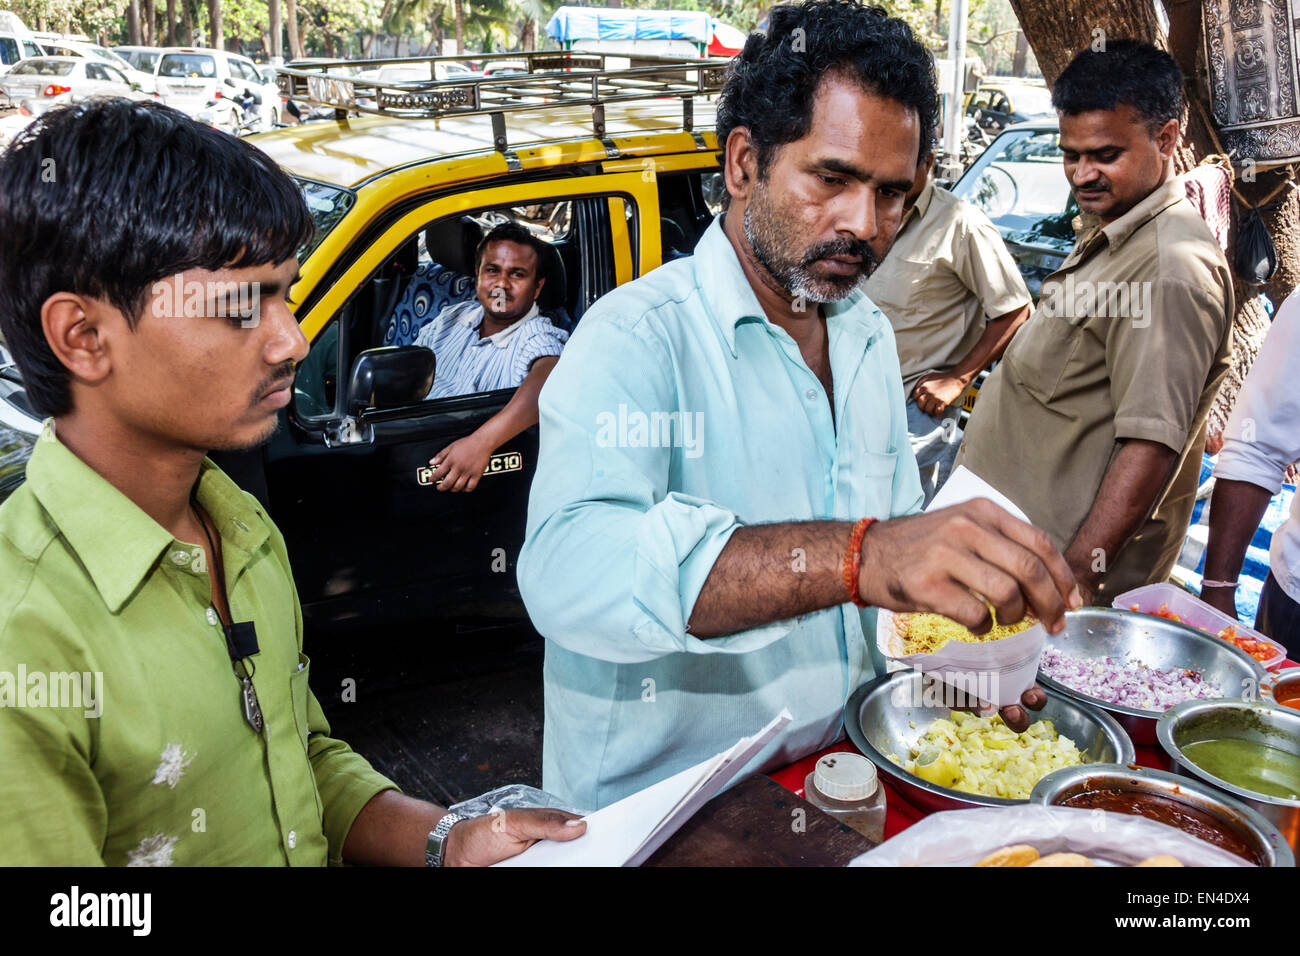 Mumbai Inde,fort Mumbai,Veer Nariman Road,Street foodstall,stalles,stand,stands,stands,vendeurs,marchand,marché,marché,homme hommes,vente,India1502 Banque D'Images